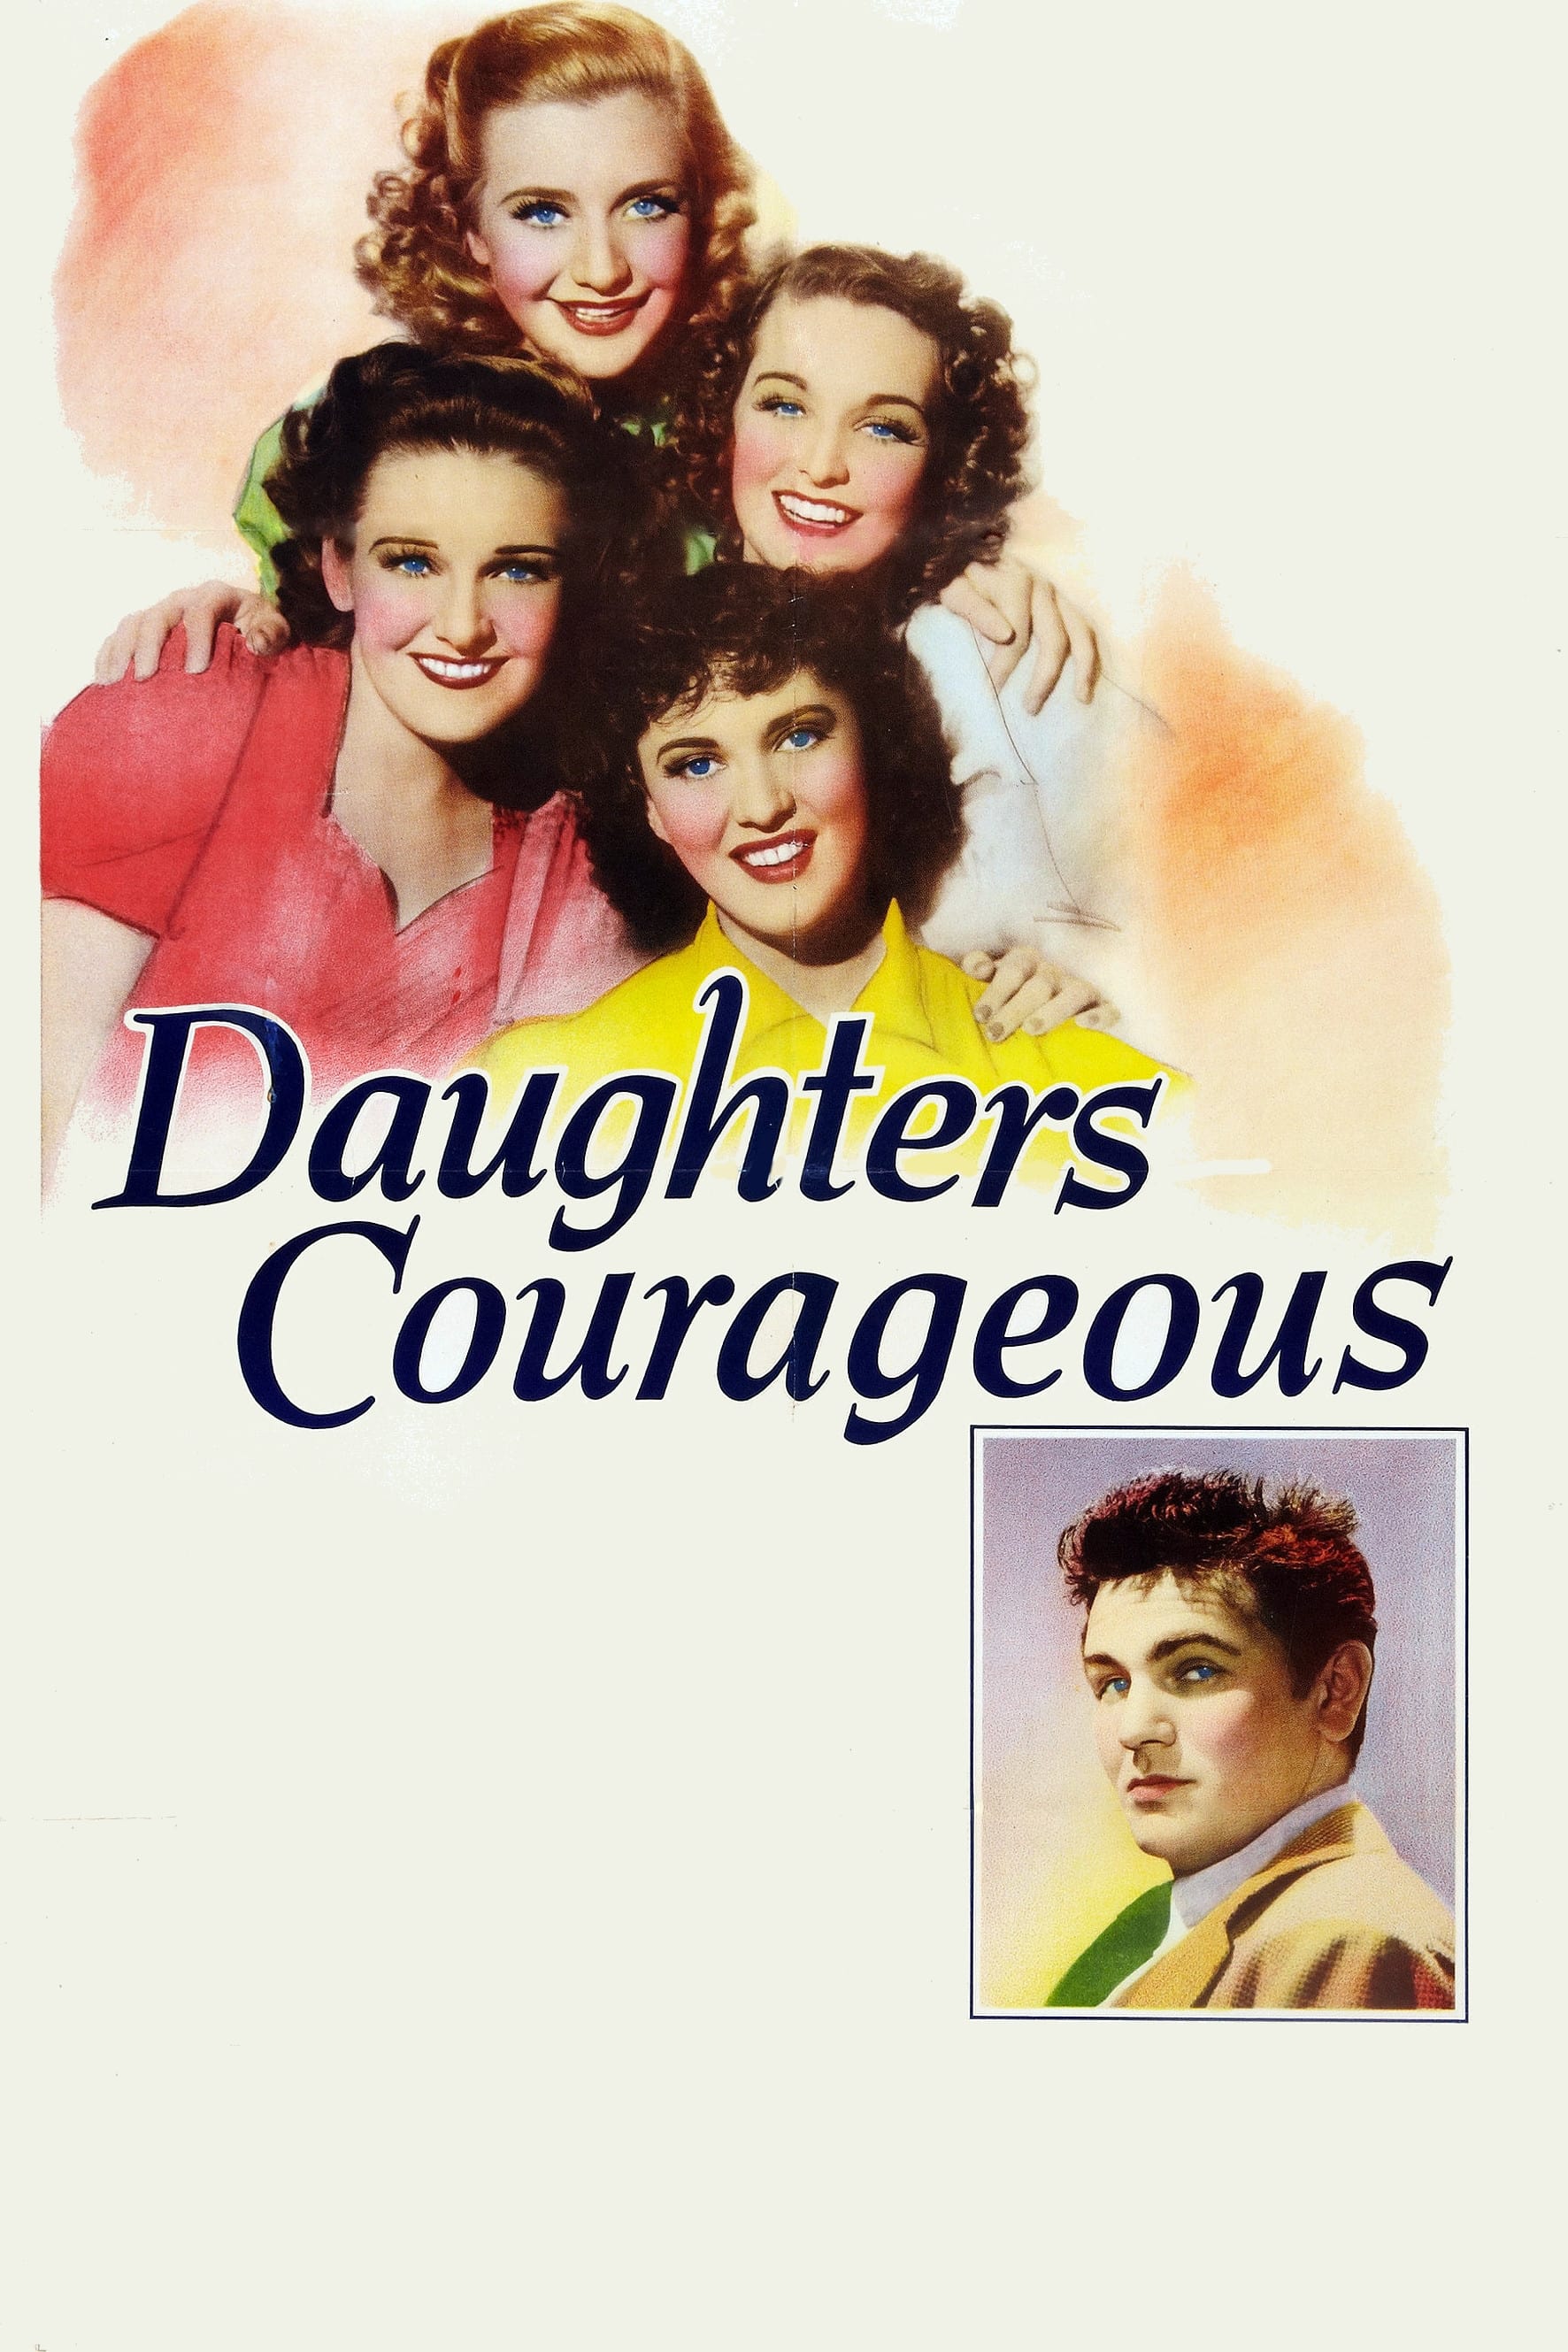 Daughters Courageous